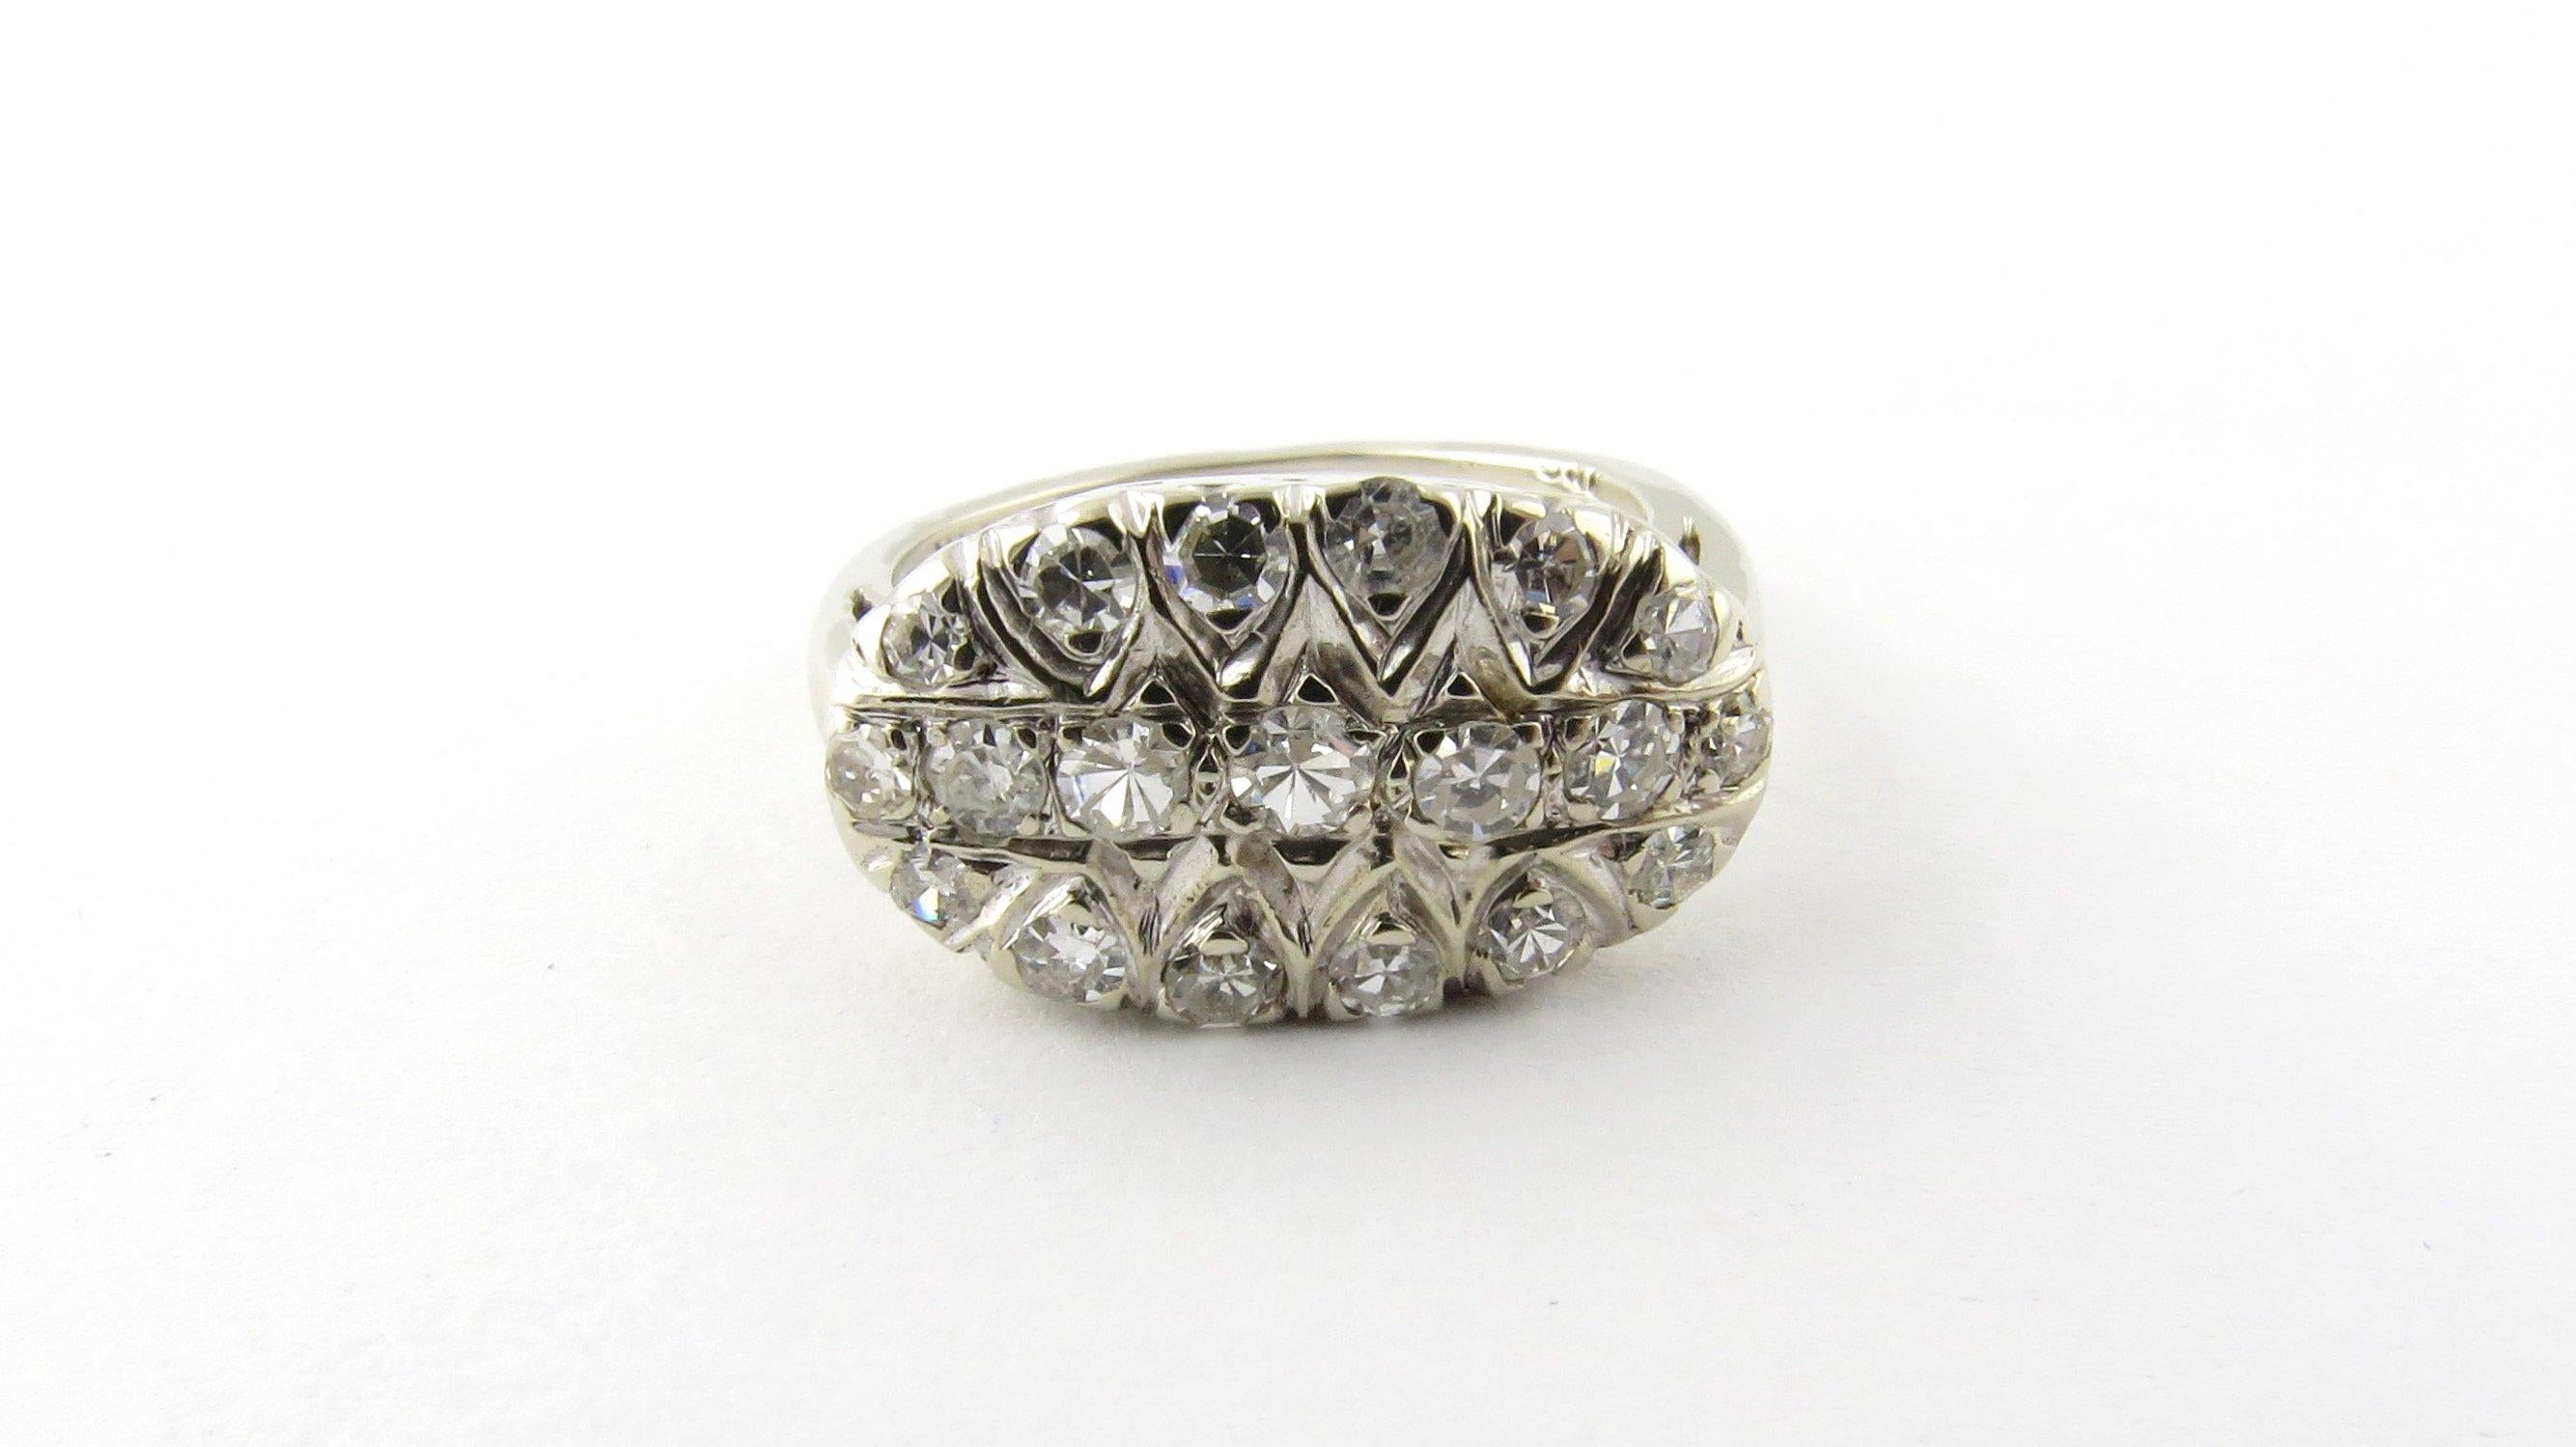 Vintage 14 Karat White Gold and Diamond Ring Size 6.5- 
This sparkling ring features 19 round single cut diamonds set in classic 14K white gold. Top of ring measures 11 mm x 18 mm. Shank measures .5 mm. *Some small chips noted to several stones. Not